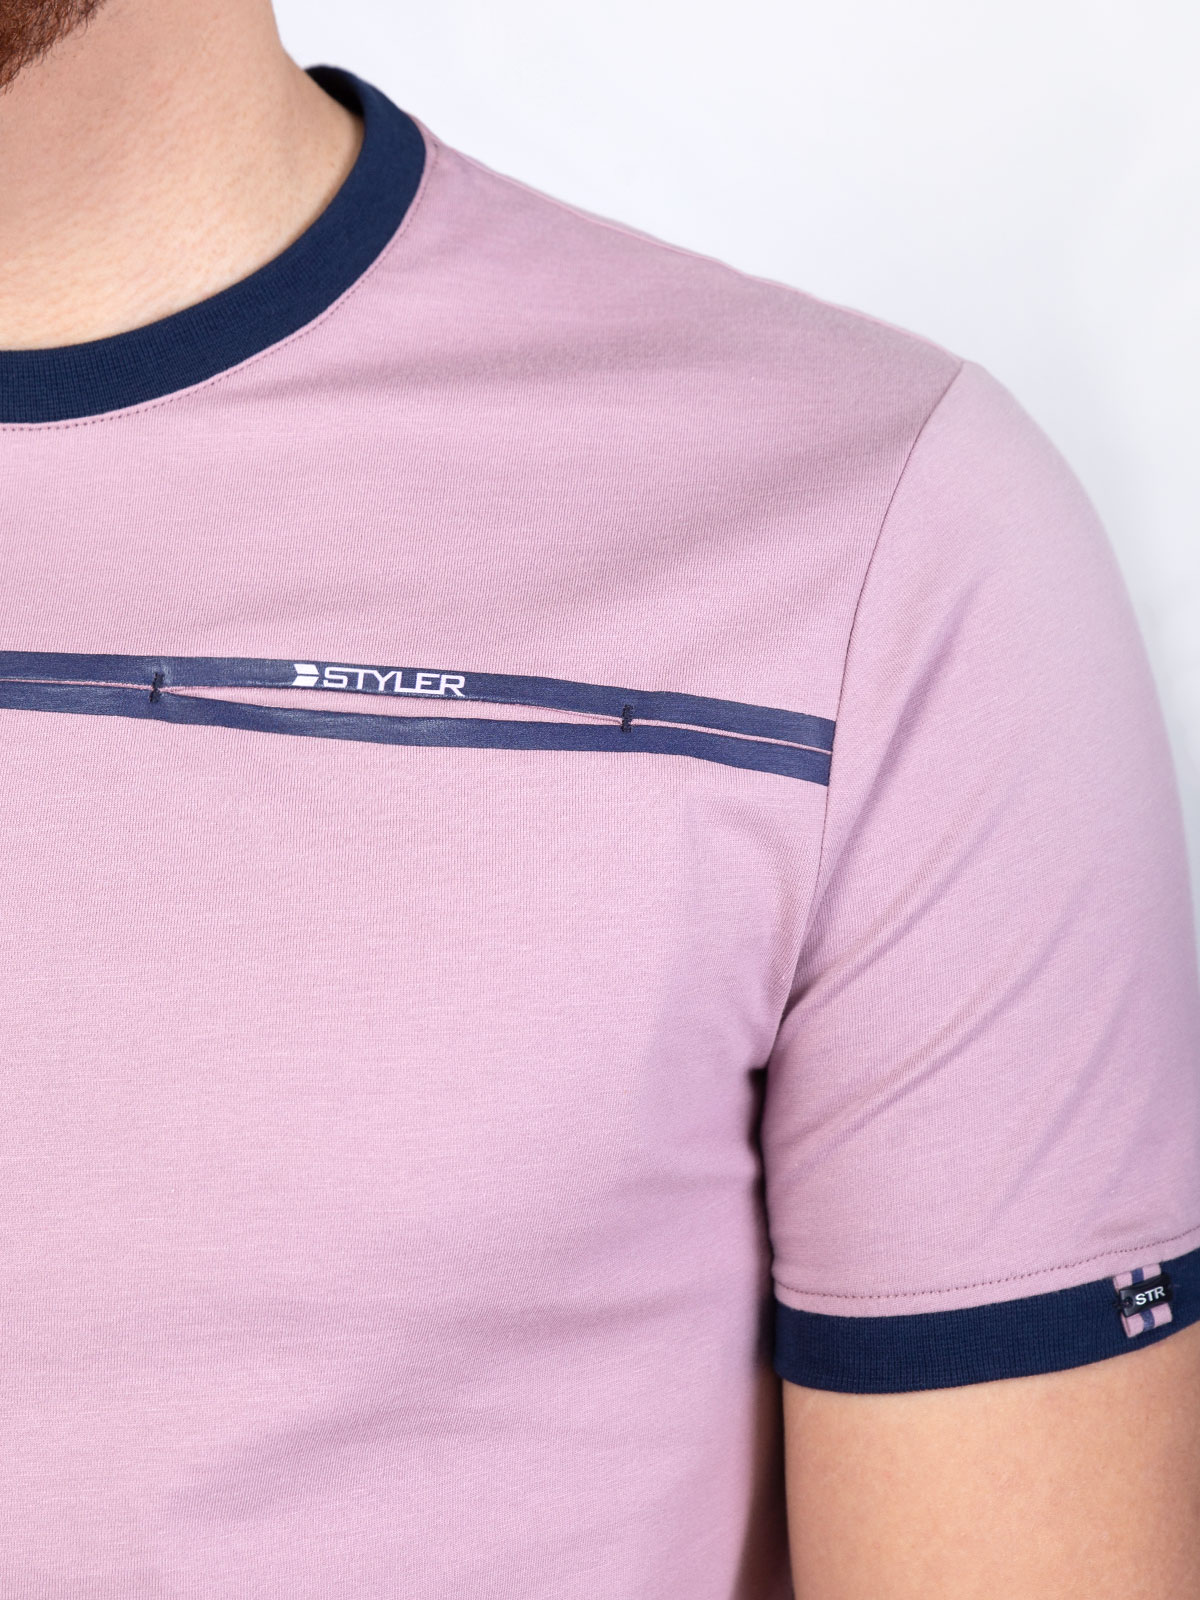 Tshirt in light purple with blue accent - 96390 € 12.37 img2